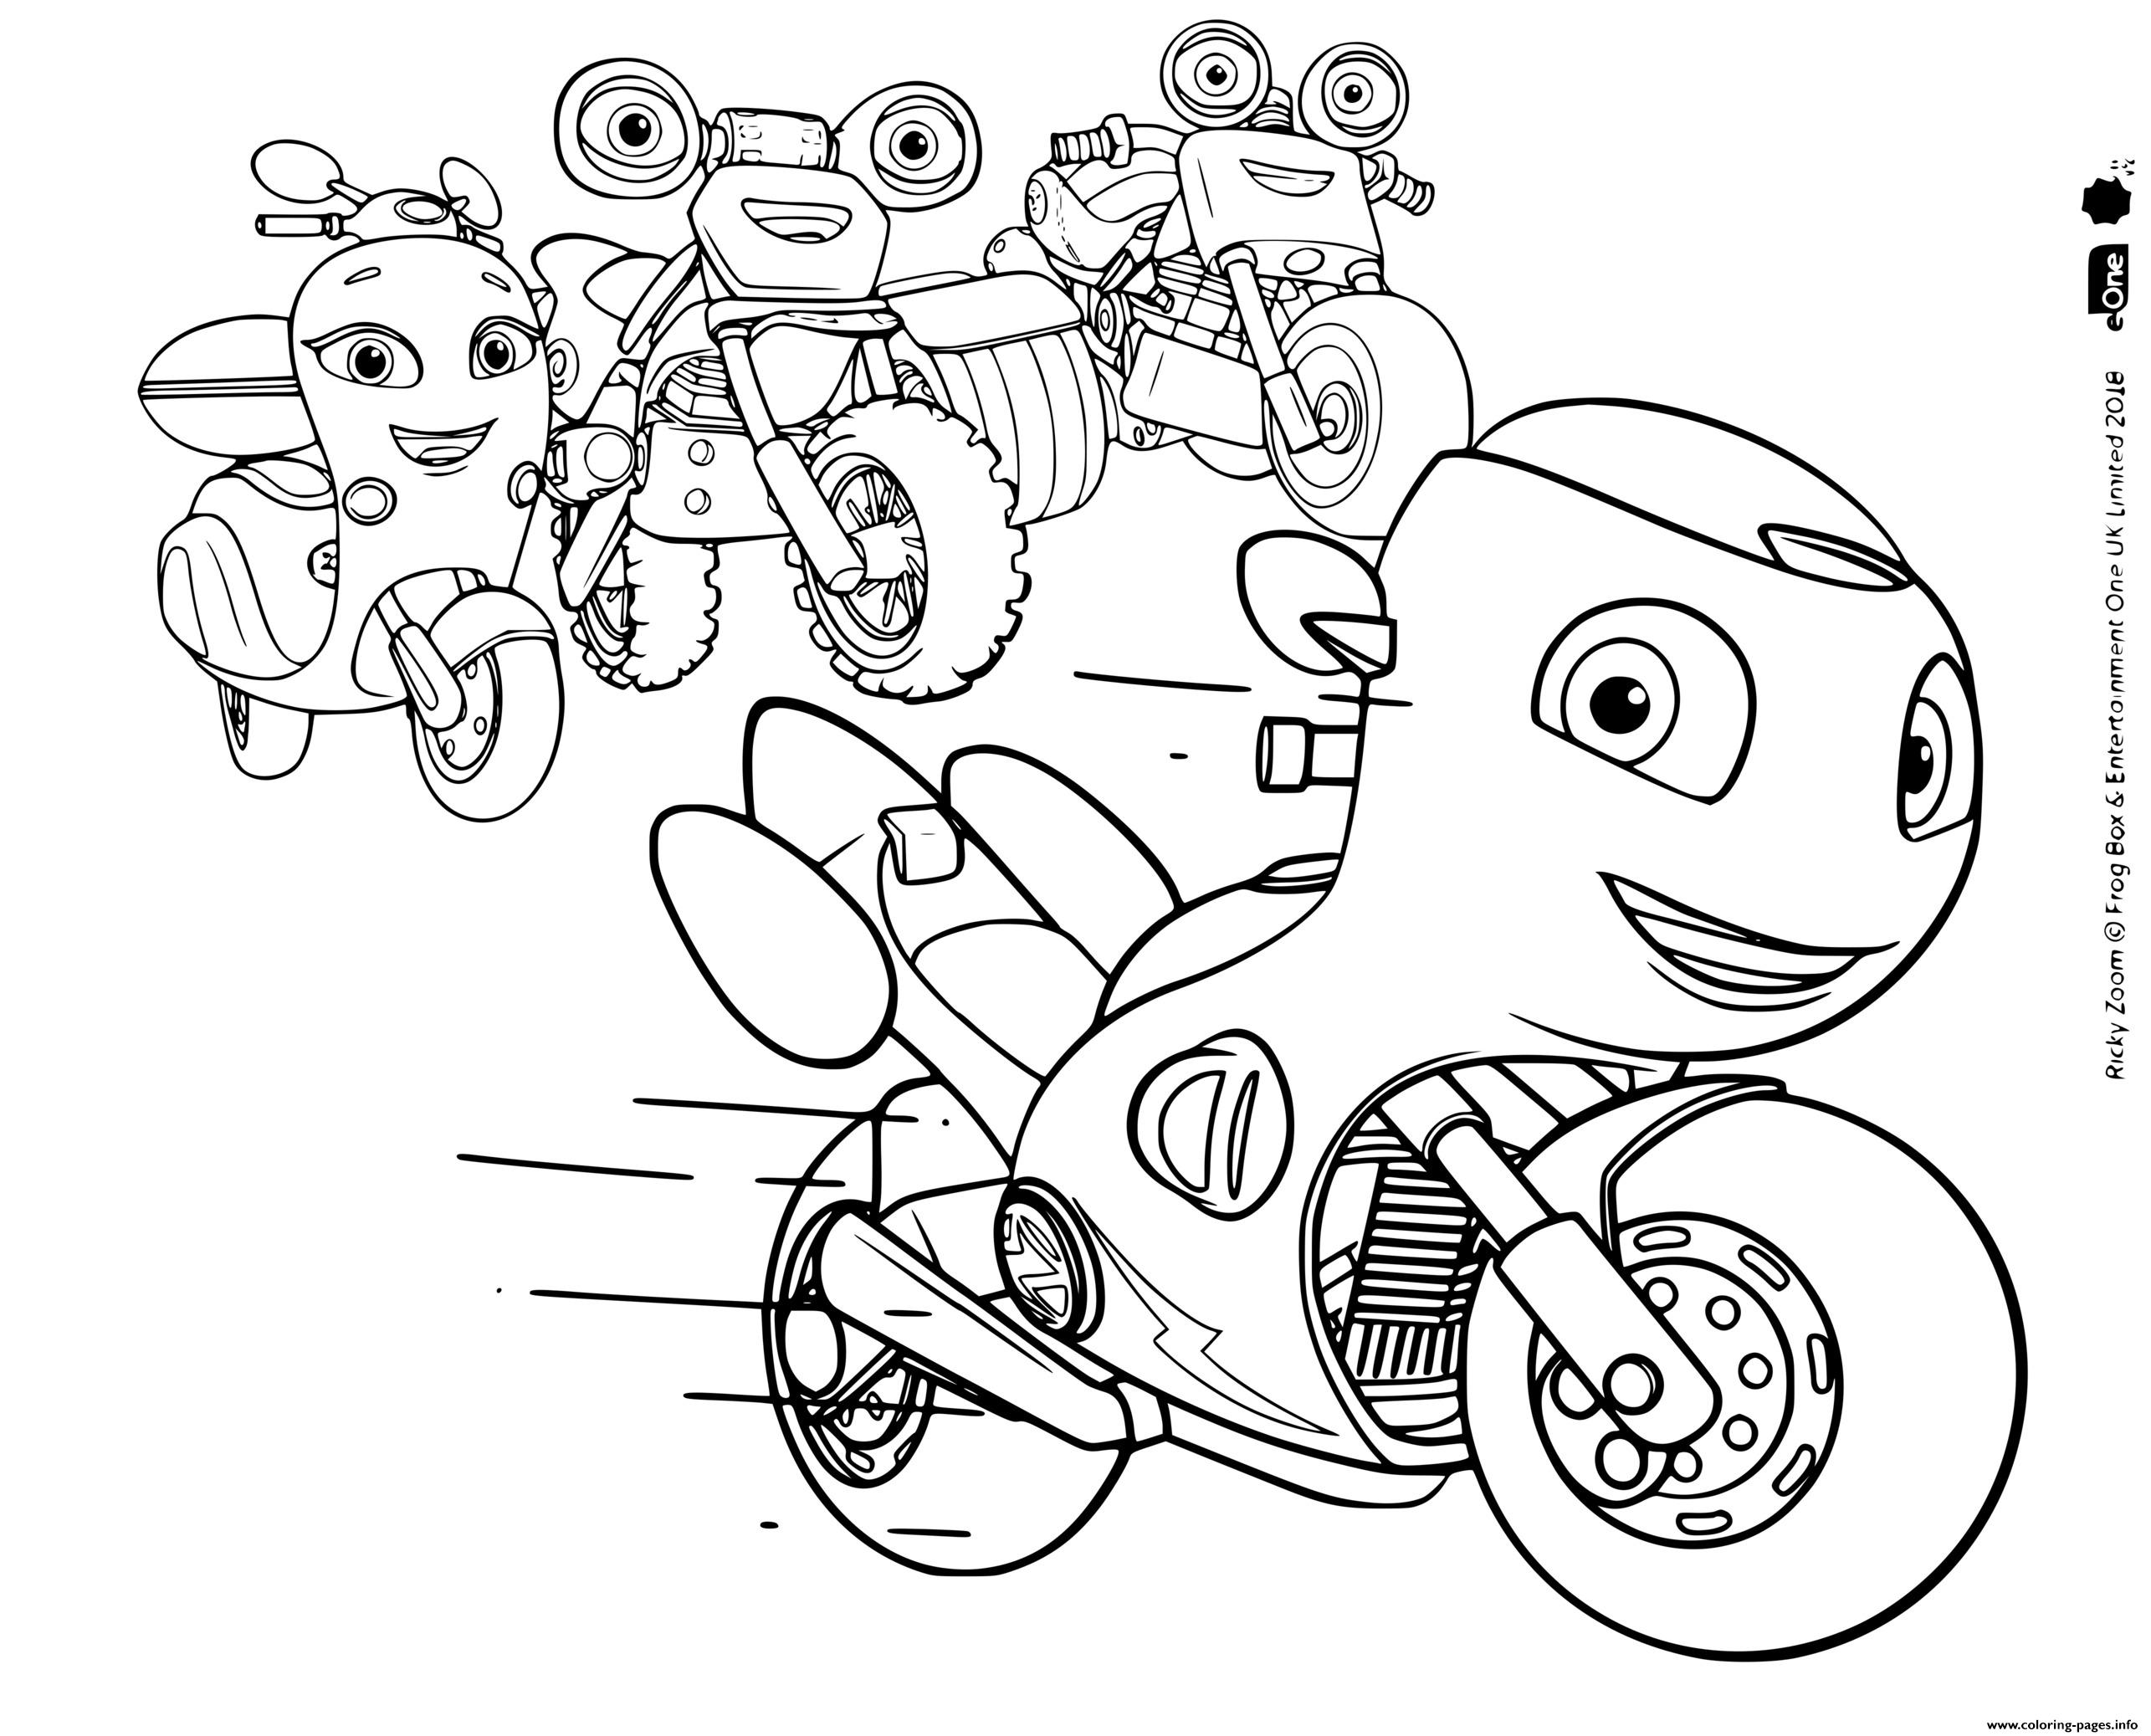 Ricky Zoom Coloring Pages / Ricky Zoom Ausmalbilder / Built for speed